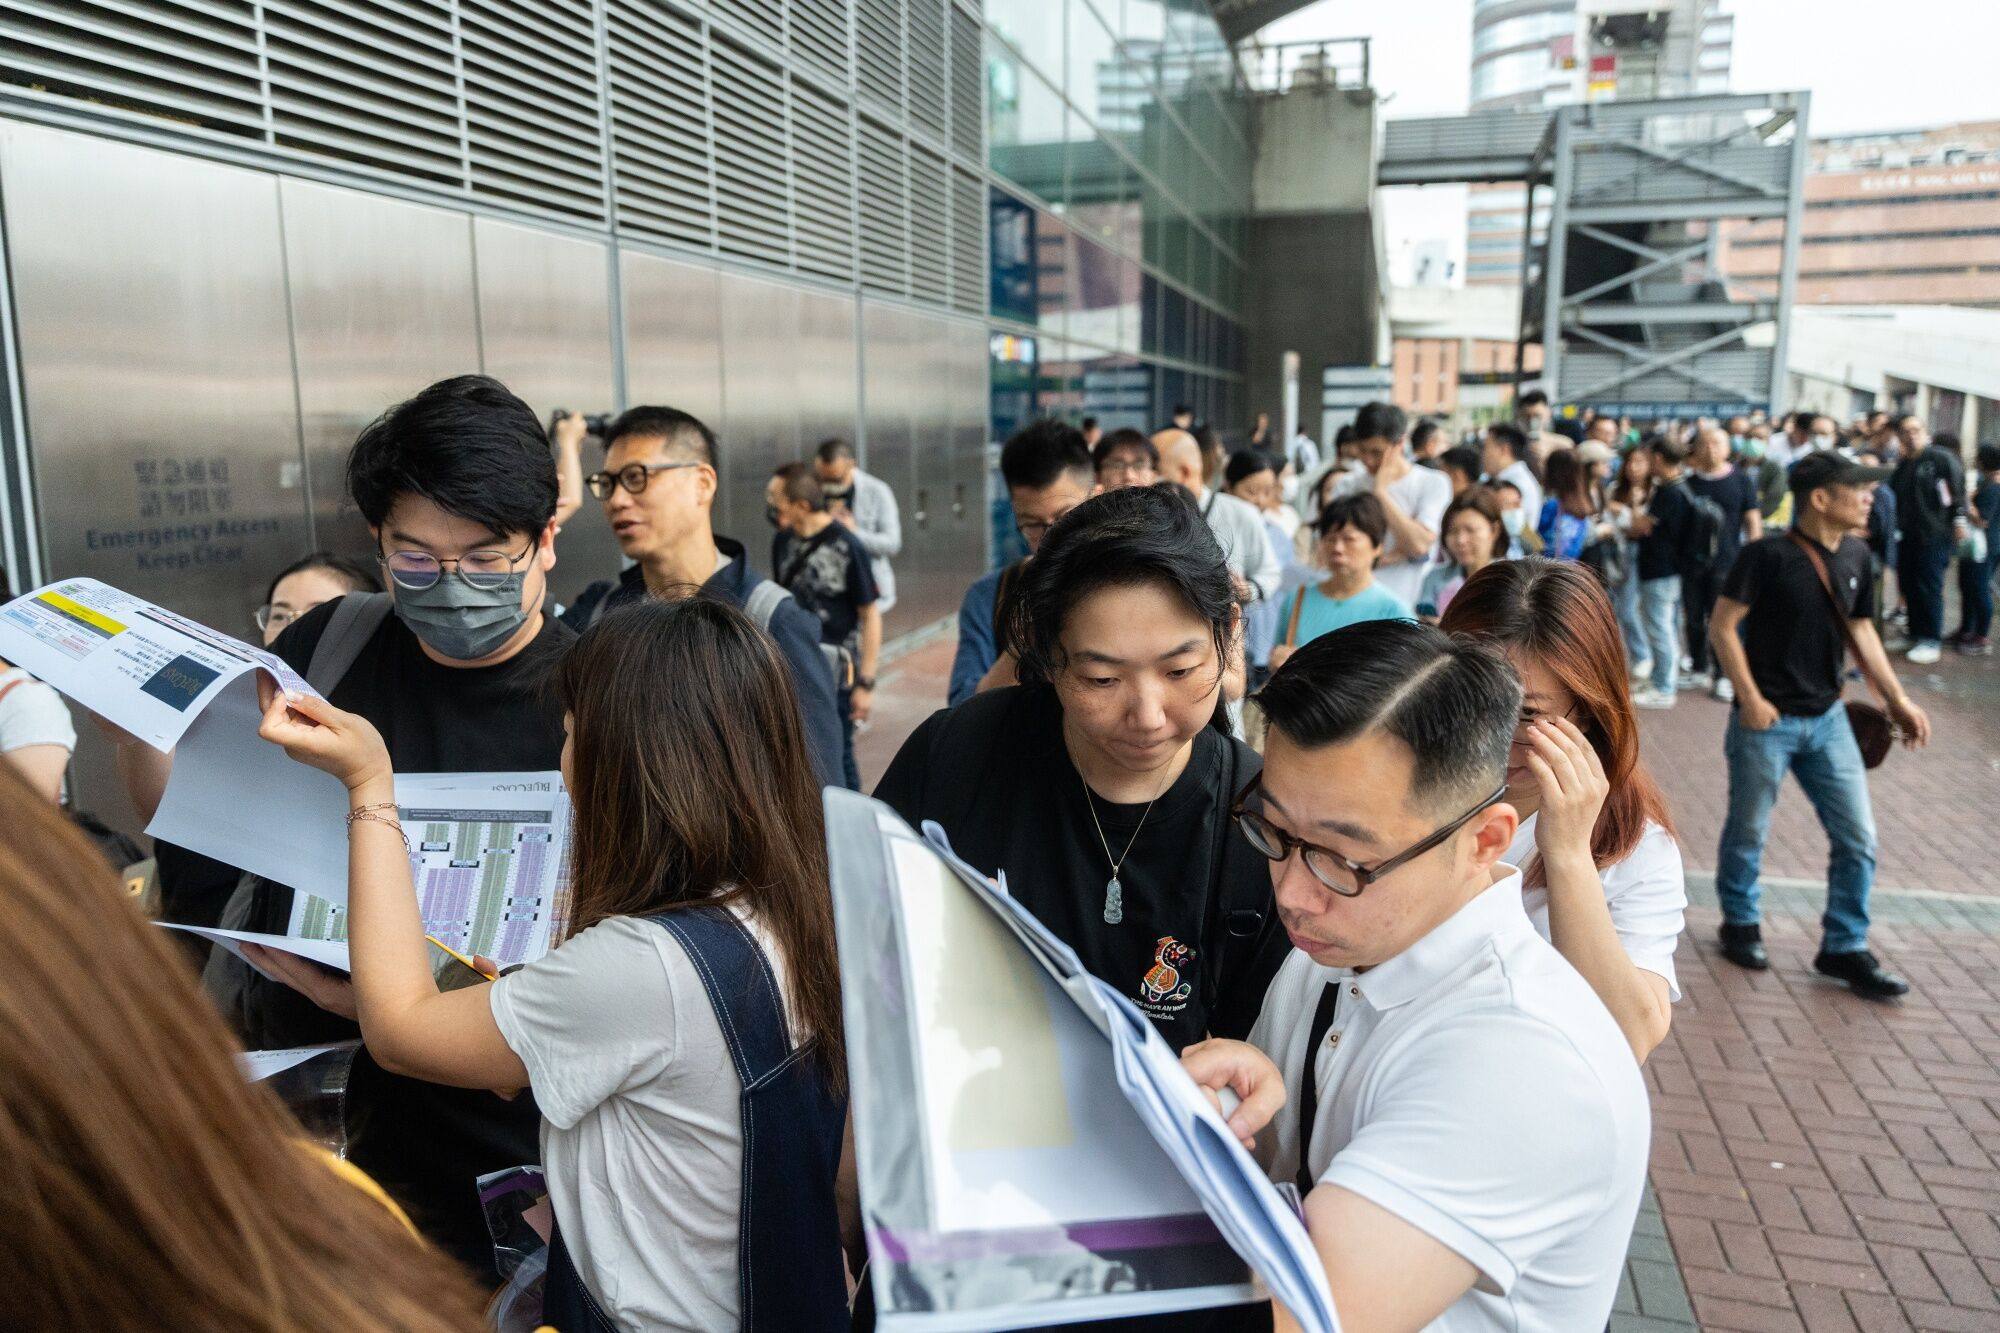 Prospective buyers stand in line outside the sales office for a housing project on April 6. The withdrawal of property cooling measures in Hong Kong has given the market a boost. Photo: Bloomberg